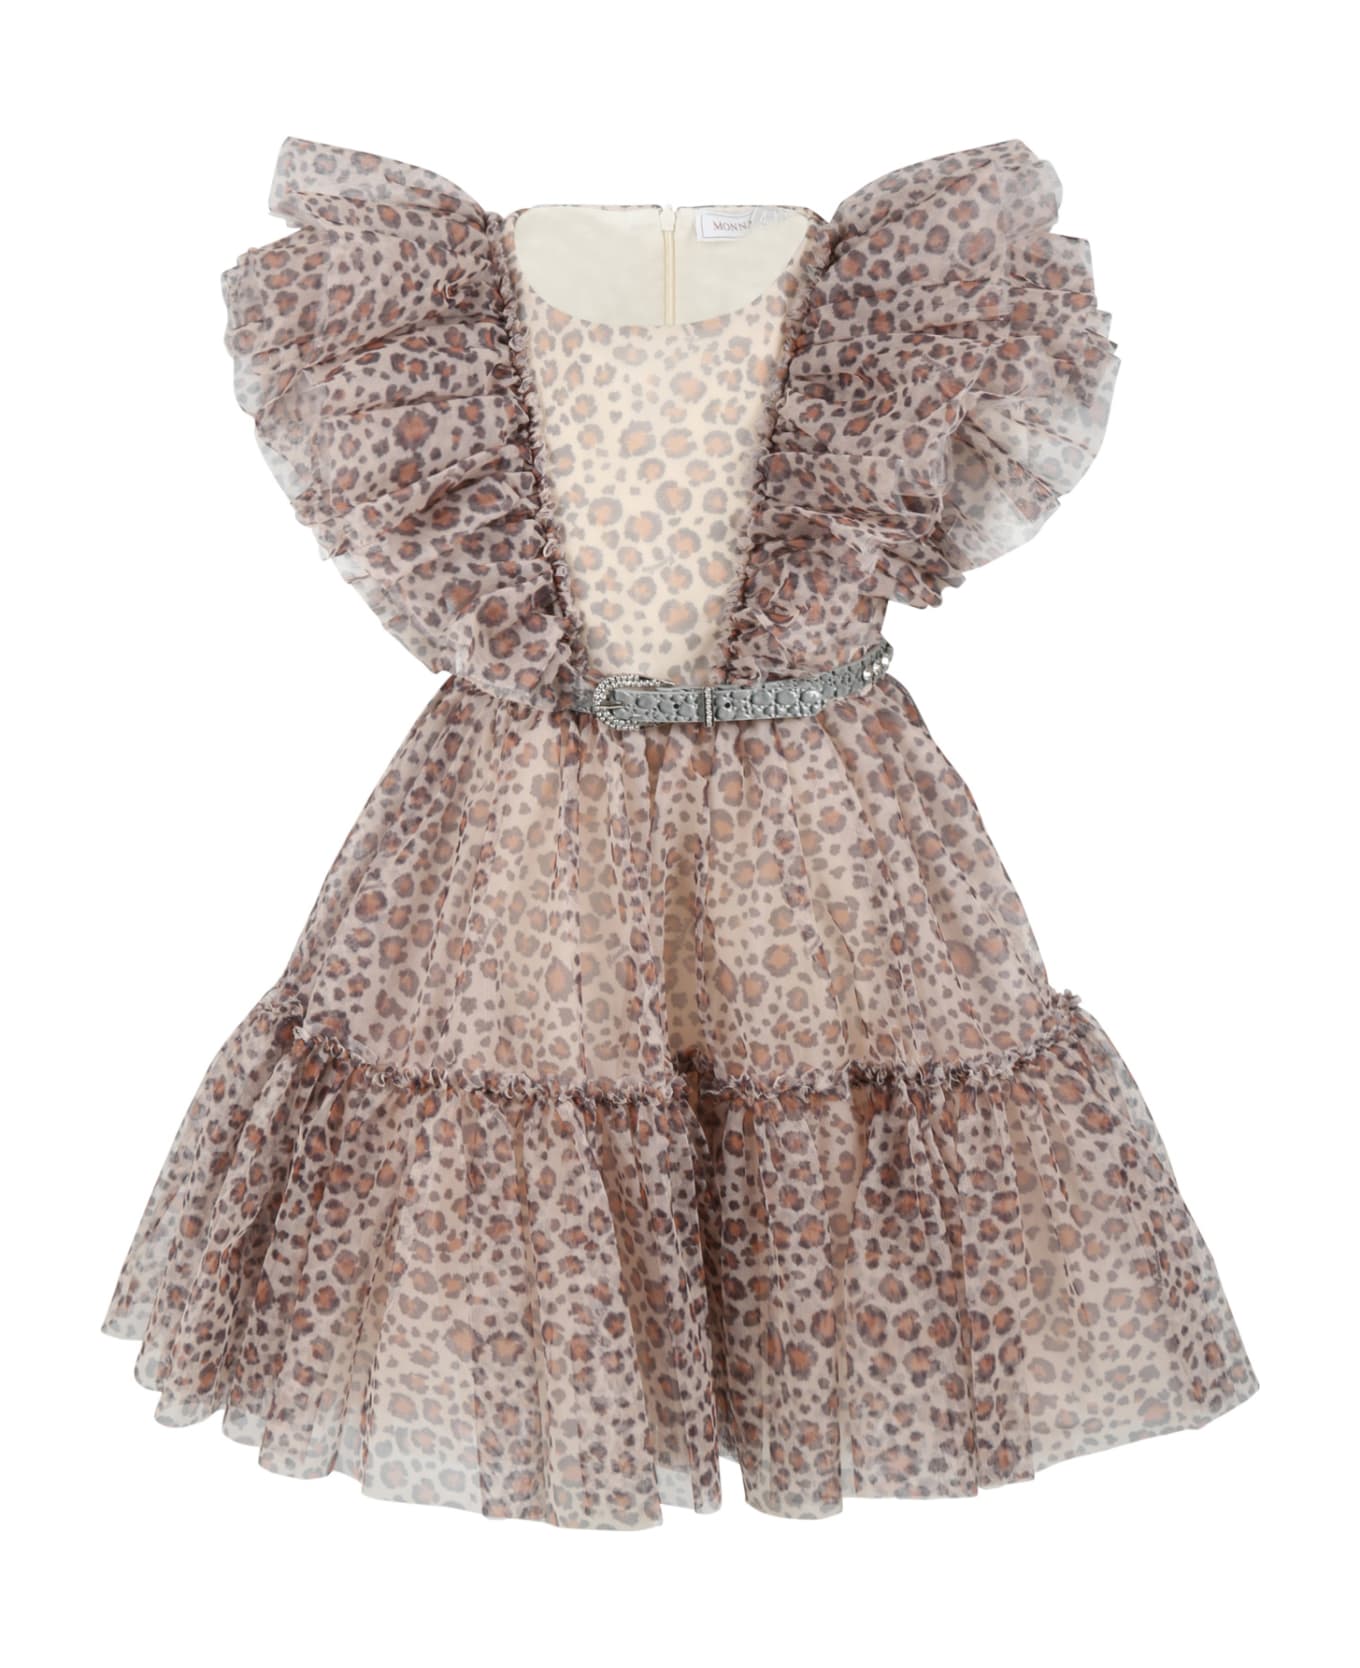 Monnalisa Beige Dress For Baby Girl With Spotted Print - Brown